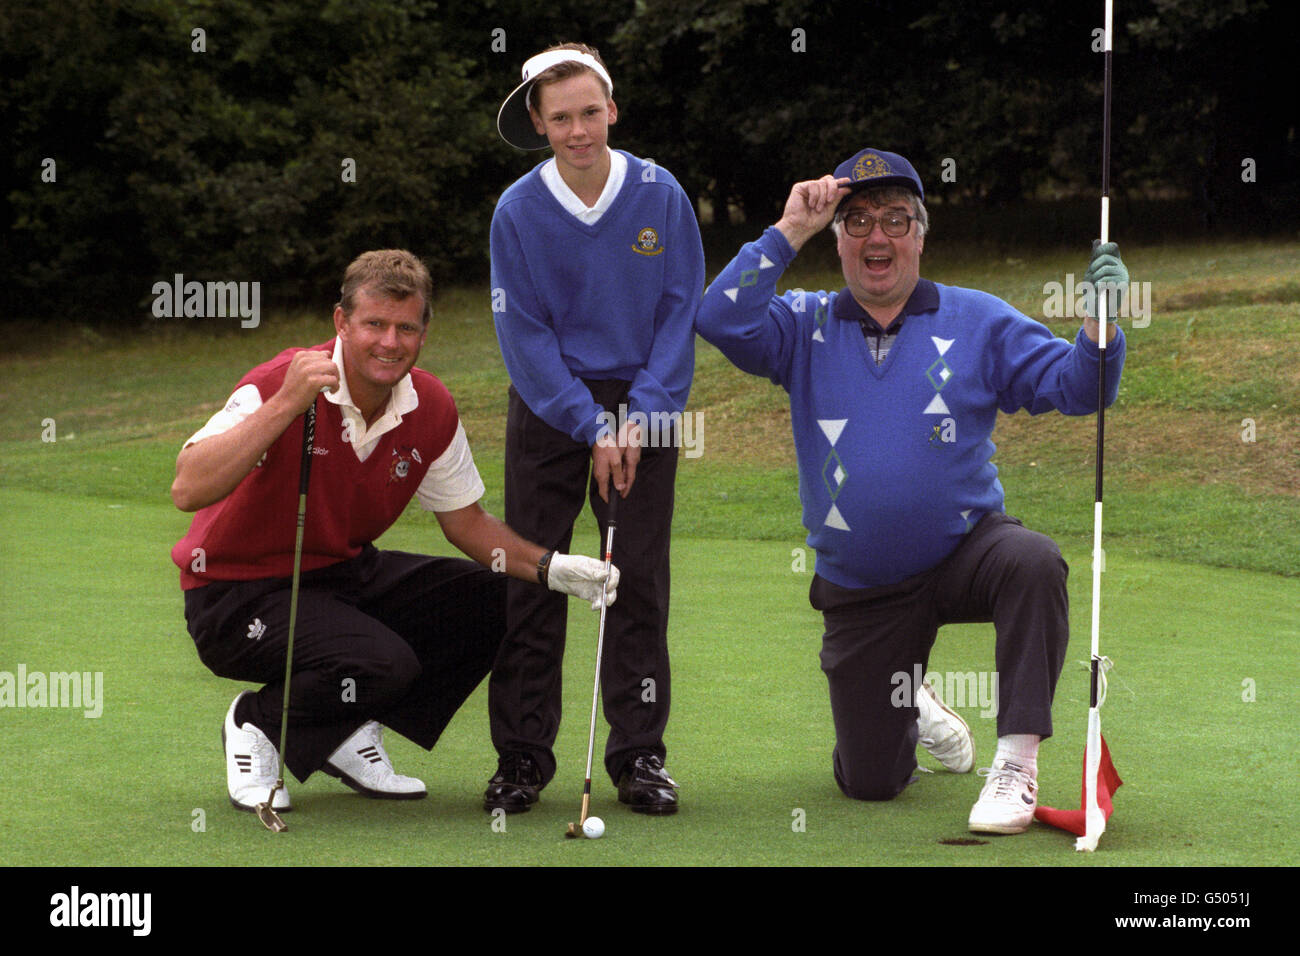 Former leukaemia sufferer, 14 year old David Evans (centre), from Gwynedd, North Wales, joined two of his heroes golfer Sandy Lyle and Northern Ireland comedian Frank Carson for Sandy's Stableford during Wentworth's Celebrity Pro-Am Golf Tournament. The Stableford is an annual fund raising event for children with leukaemia. Stock Photo